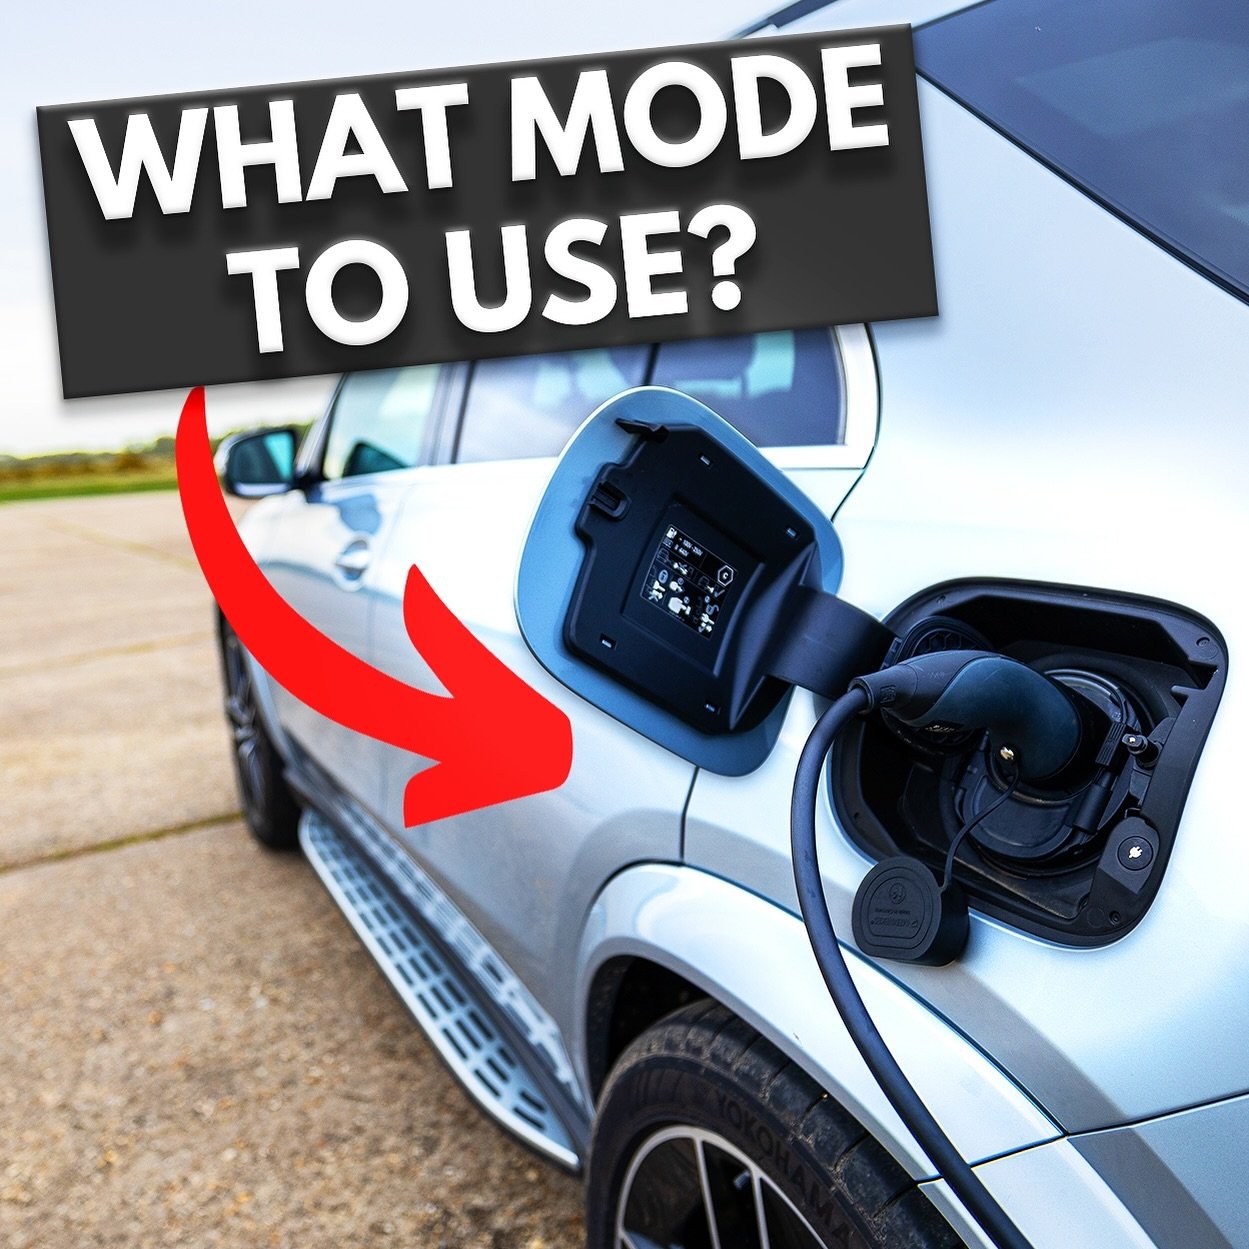 If you own a Mercedes Plug-in Hybrid, this is for you!

There&rsquo;s different drive modes like, HYBRID, ELECTRIC, BATTERY HOLD, SPORT and more. But what do they mean?

Find out on my latest video on YT!

#Mercedes #MercedesBenz #MercedesHybrid